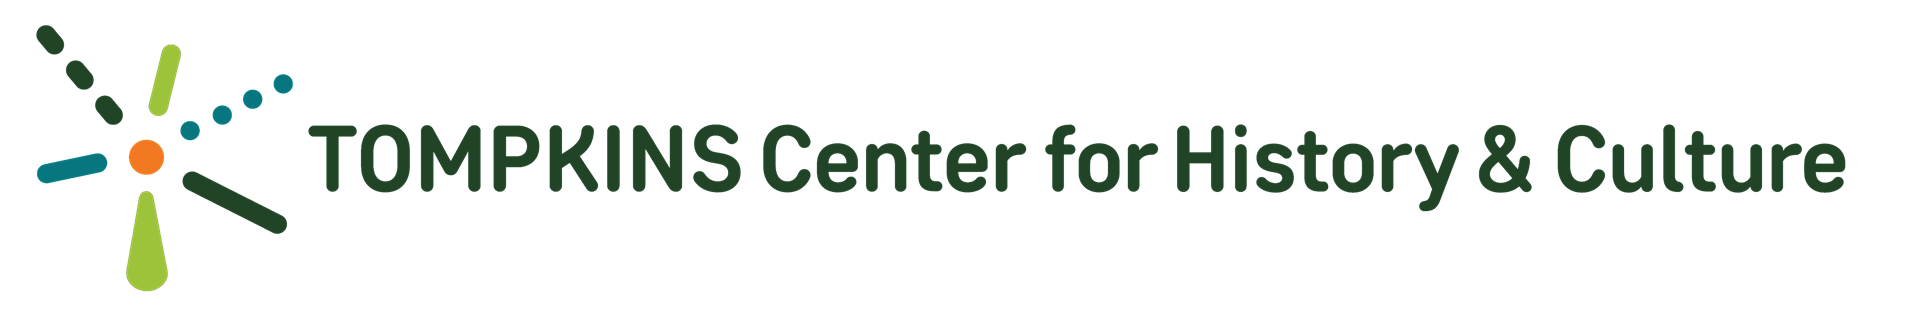 Rectangular area white background. The text reads “TOMPKINS Center for History and Culture”. On the left is the green, blue, and orange logo of the Tompkins Center for History and Culture